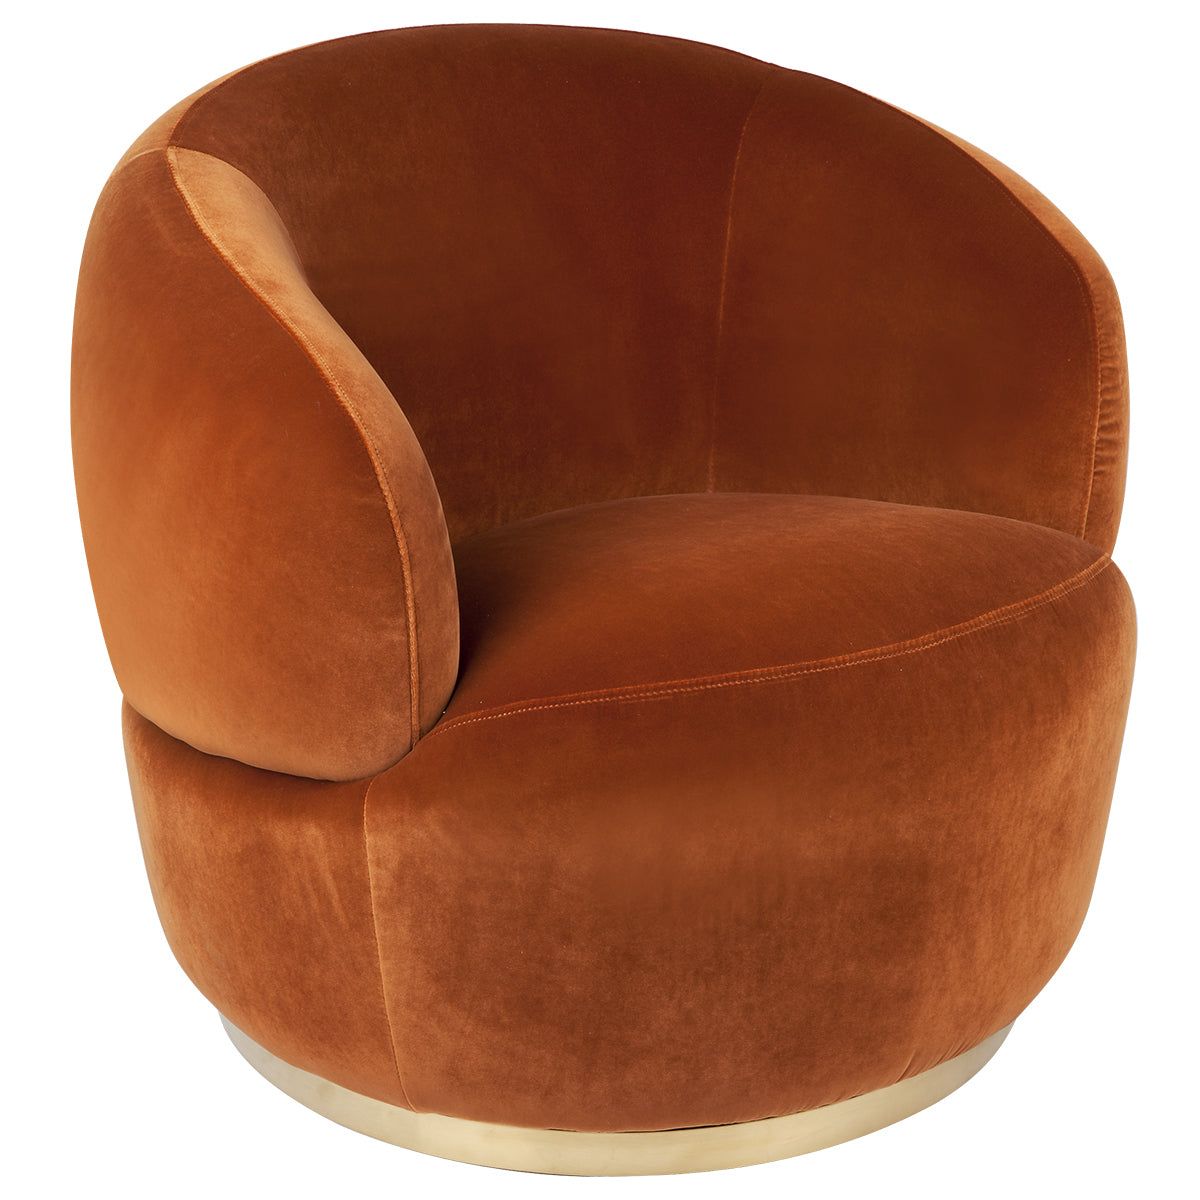 Modern swivel Occasional chairs – a
chair  for every occasion!